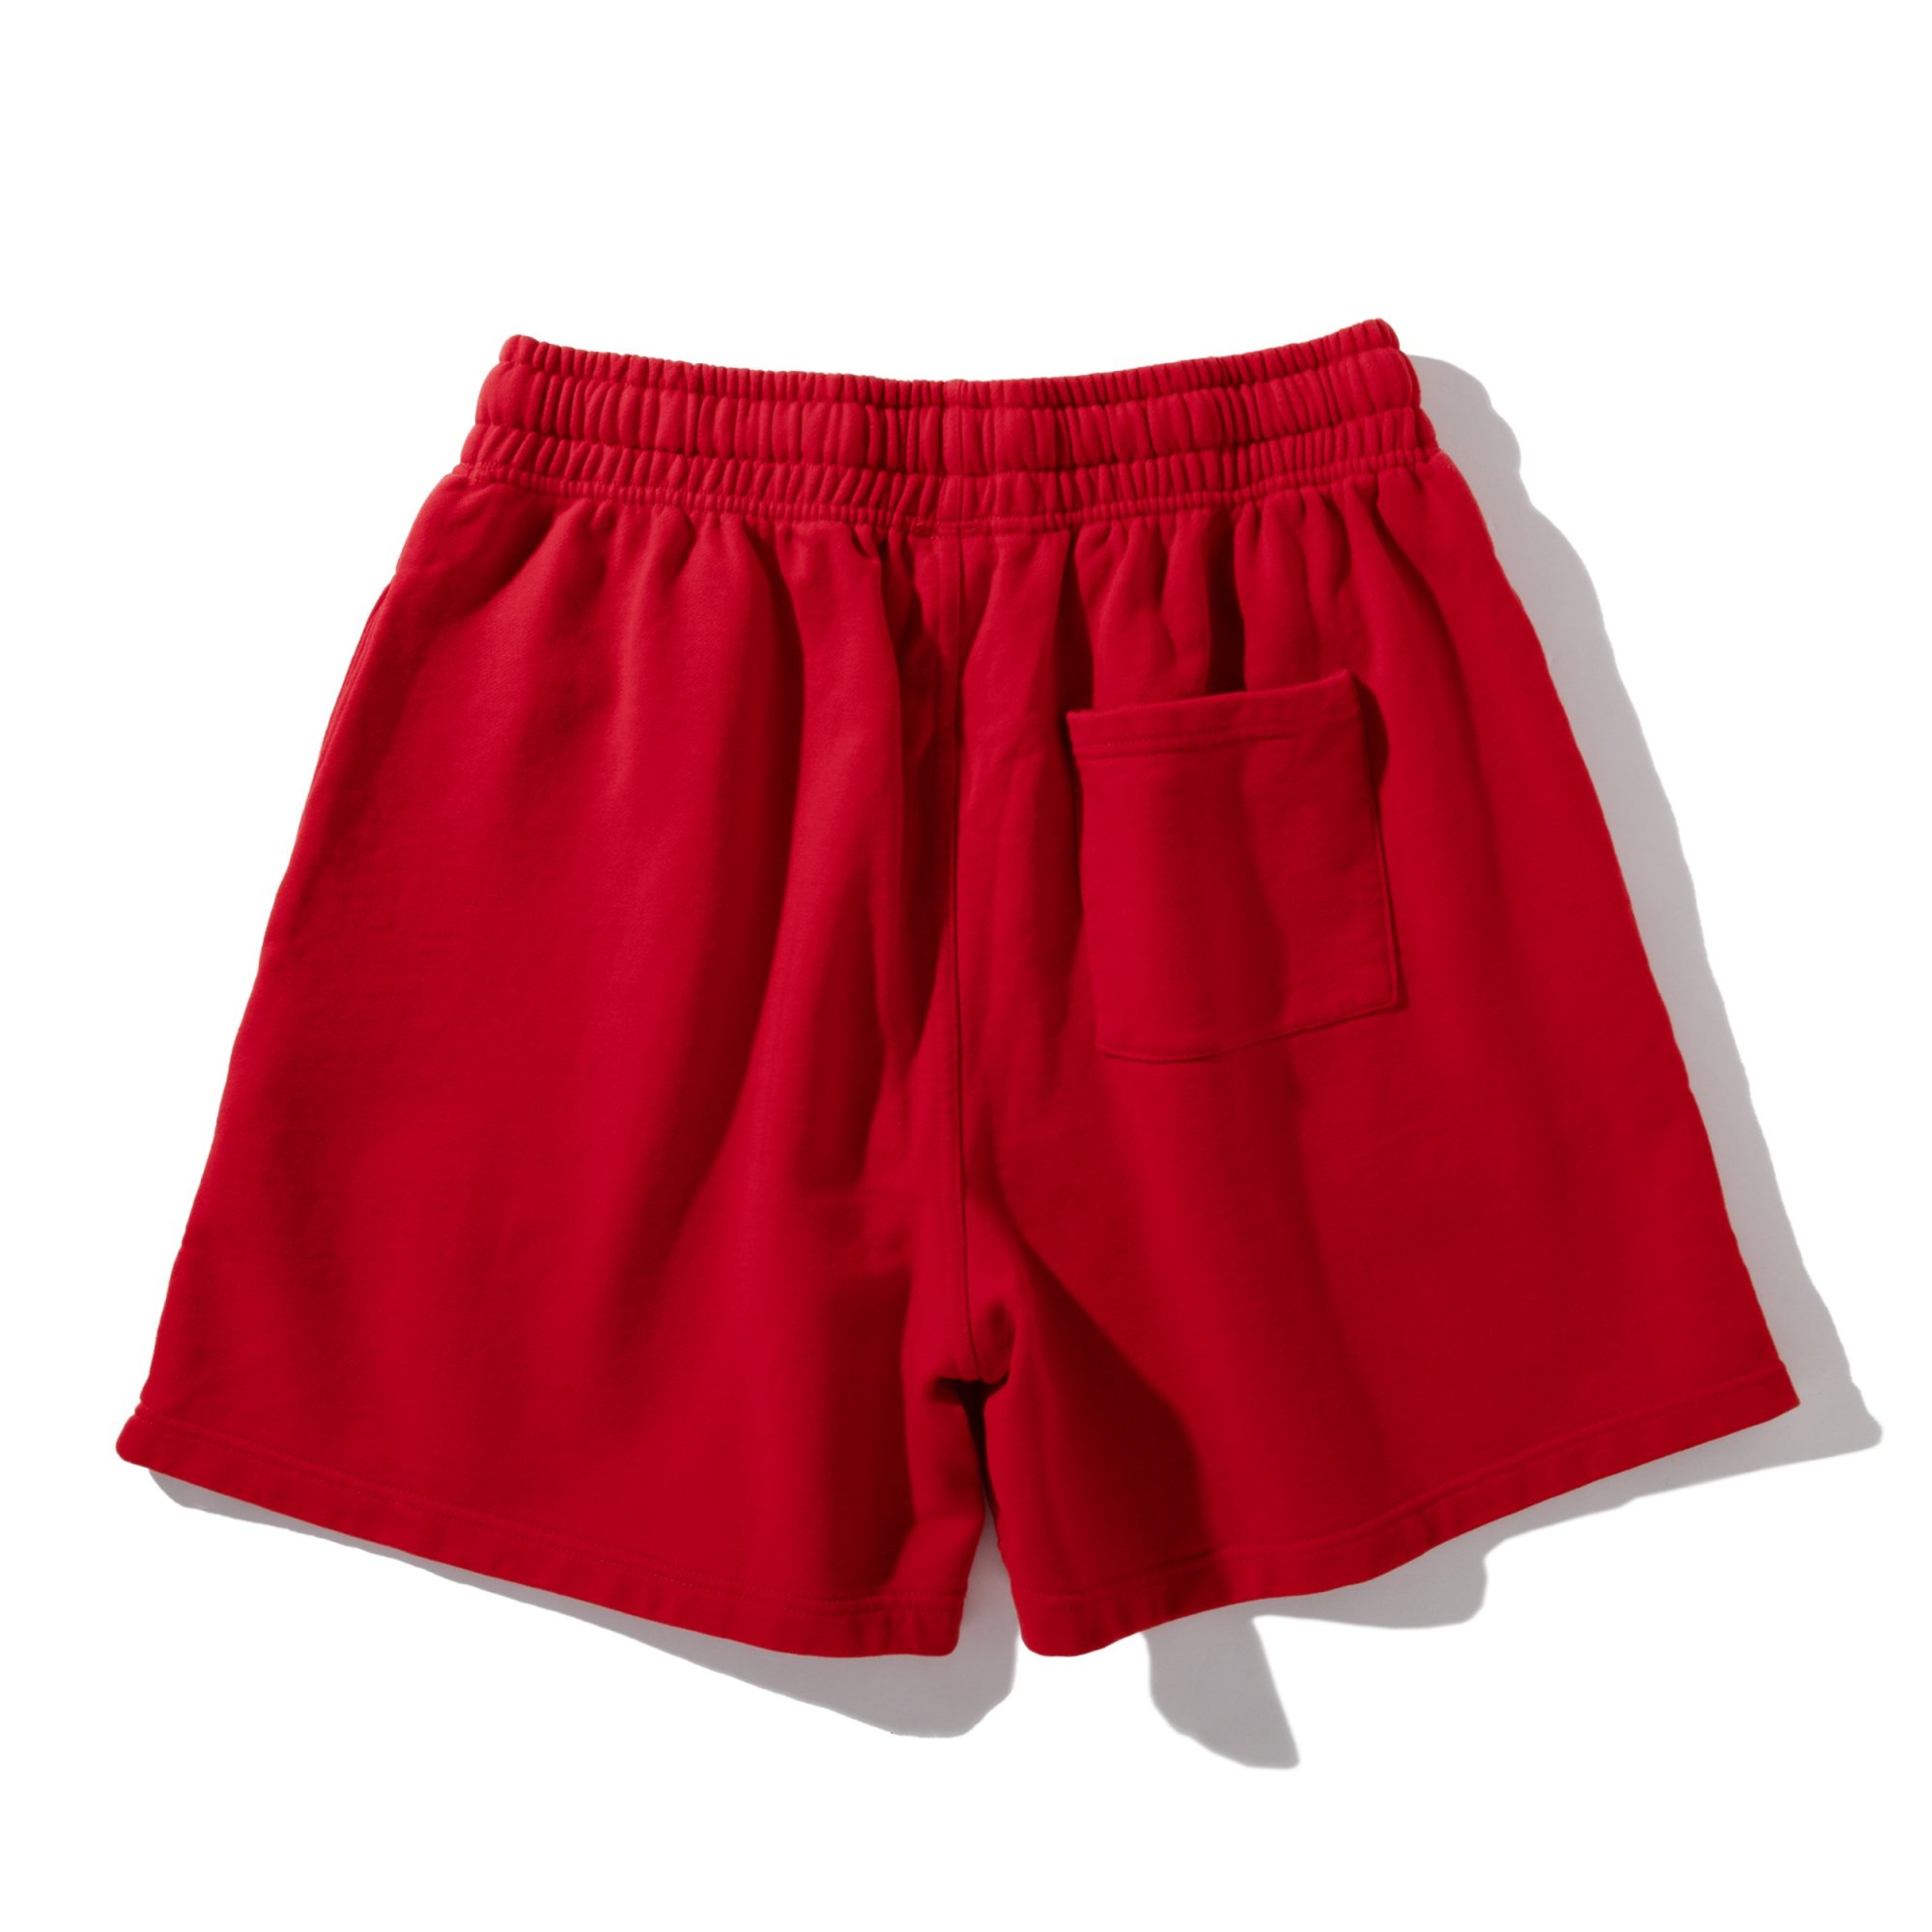 SEPARATE BATH & TOILET<br />SWEAT SHORTS AKA / RED<img class='new_mark_img2' src='https://img.shop-pro.jp/img/new/icons47.gif' style='border:none;display:inline;margin:0px;padding:0px;width:auto;' />